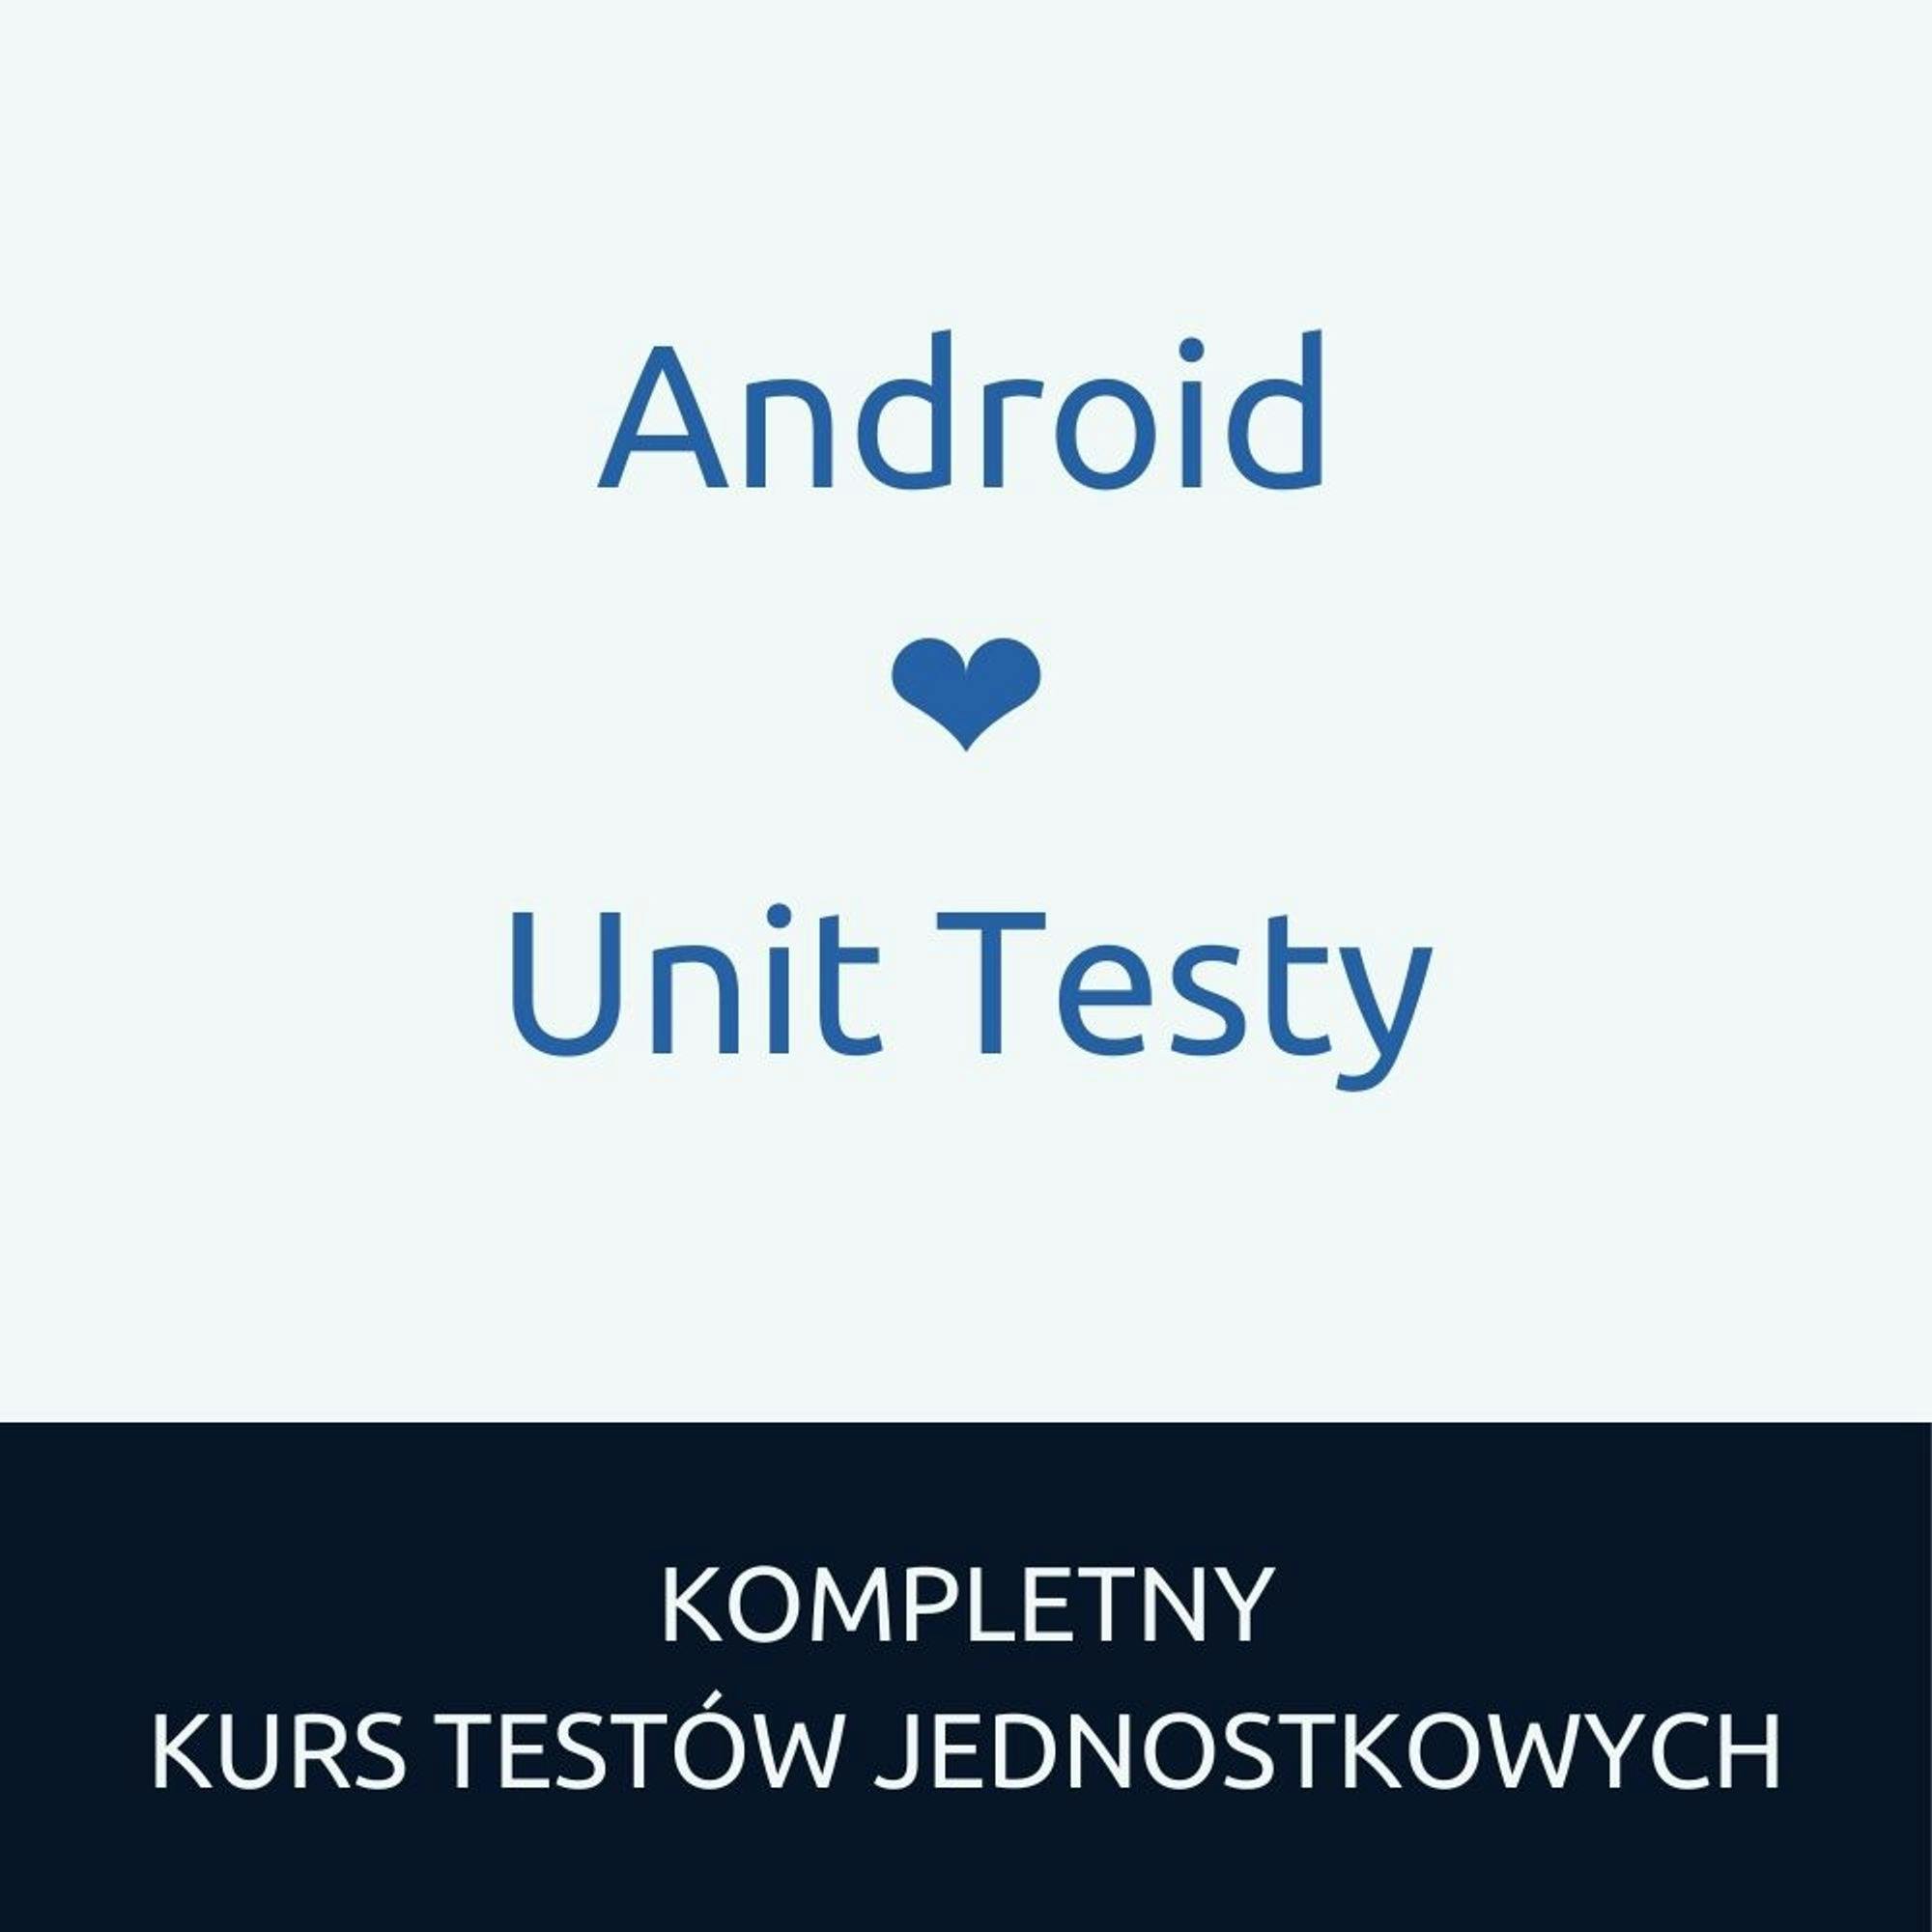 Android ❤️ Unit Testy